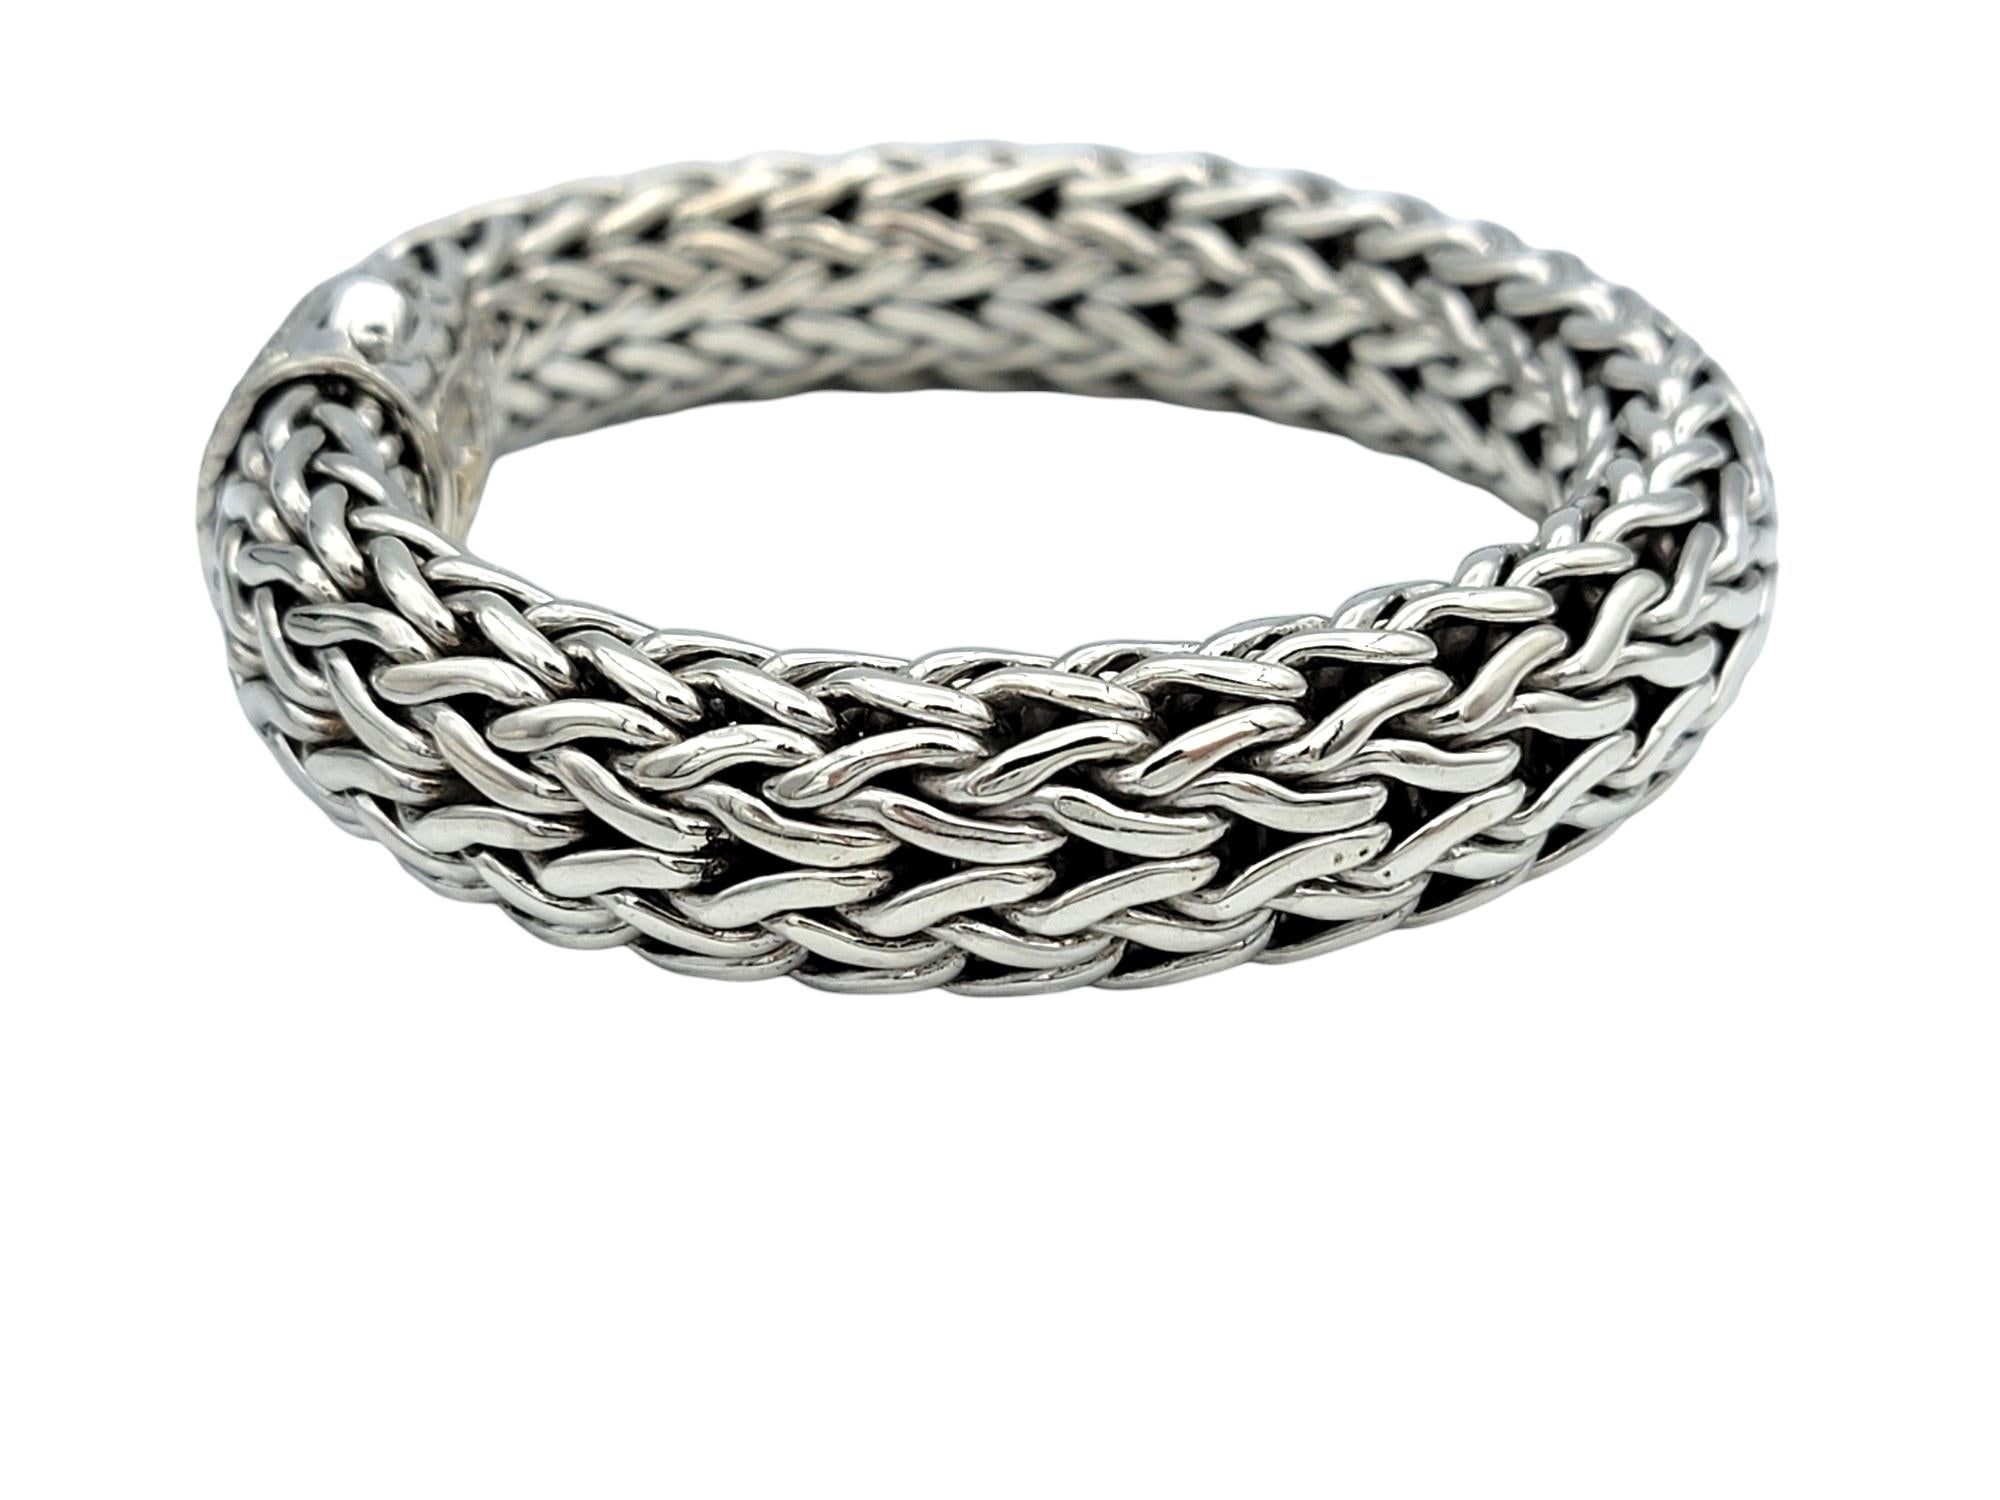 The inner circumference of this bracelet measures 6.5 inches and will comfortably fit up to a 6.25 inch wrist. 

Crafted with meticulous attention to detail, the John Hardy Icon bracelet showcases sterling silver in a woven design, exuding timeless